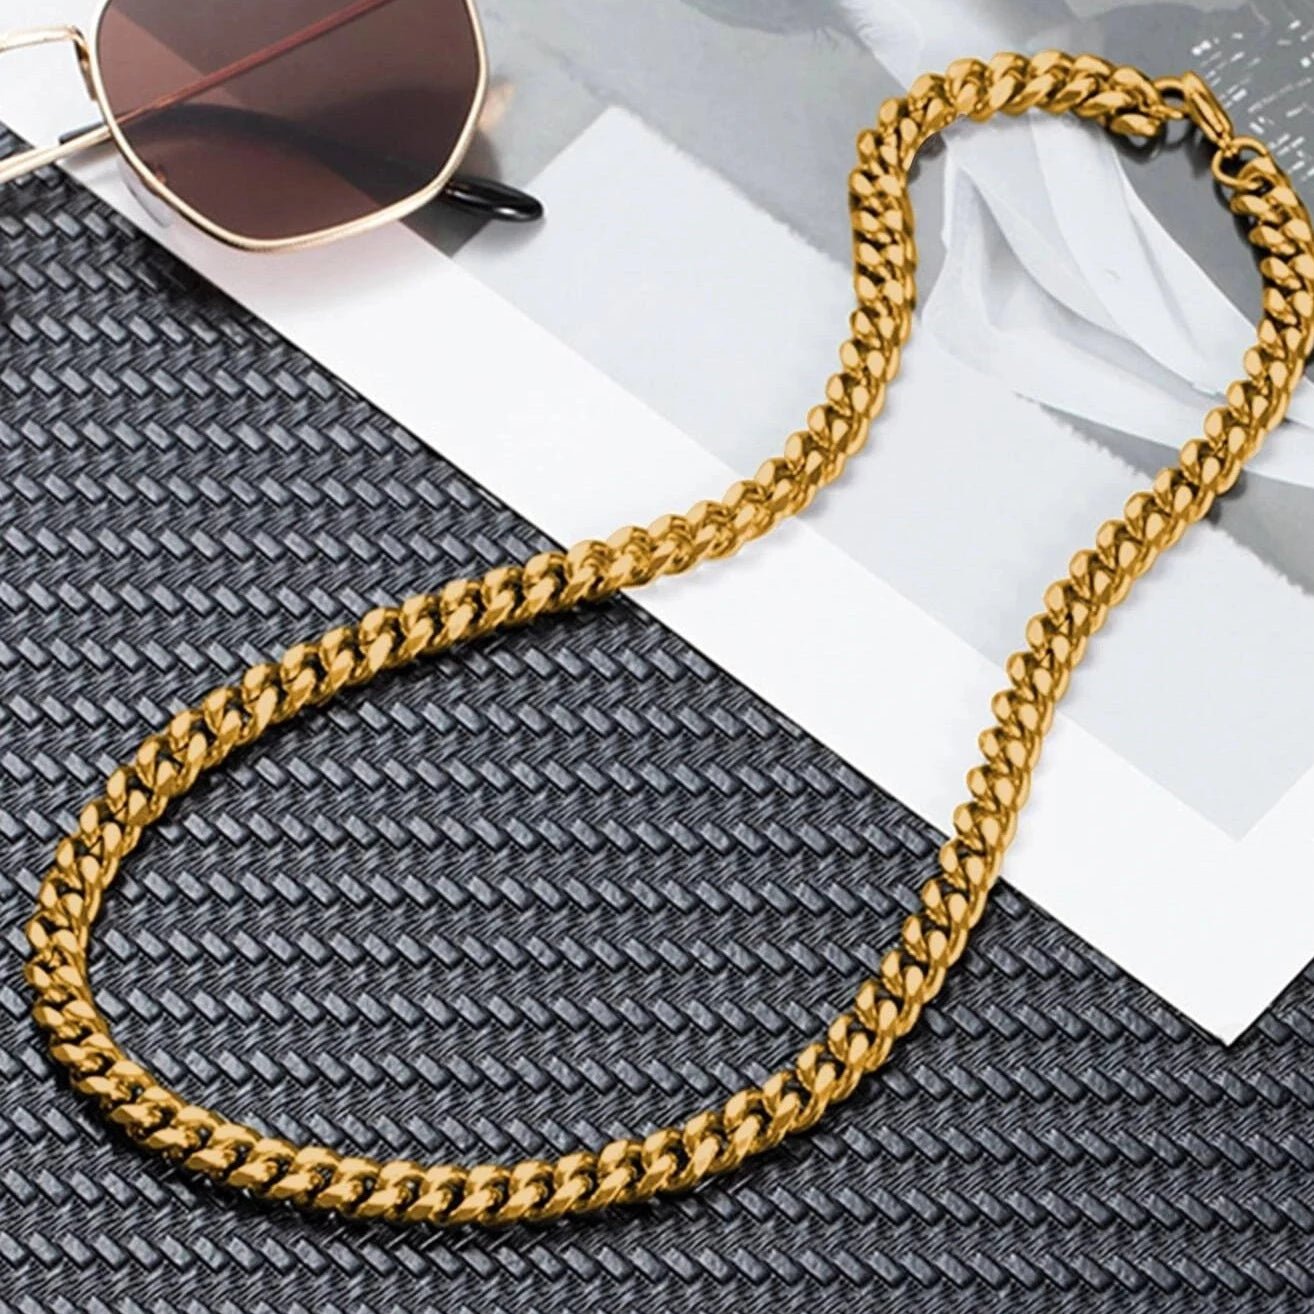 Black & Gold Stainless Steel Cuban Chain Necklace - IceGlint